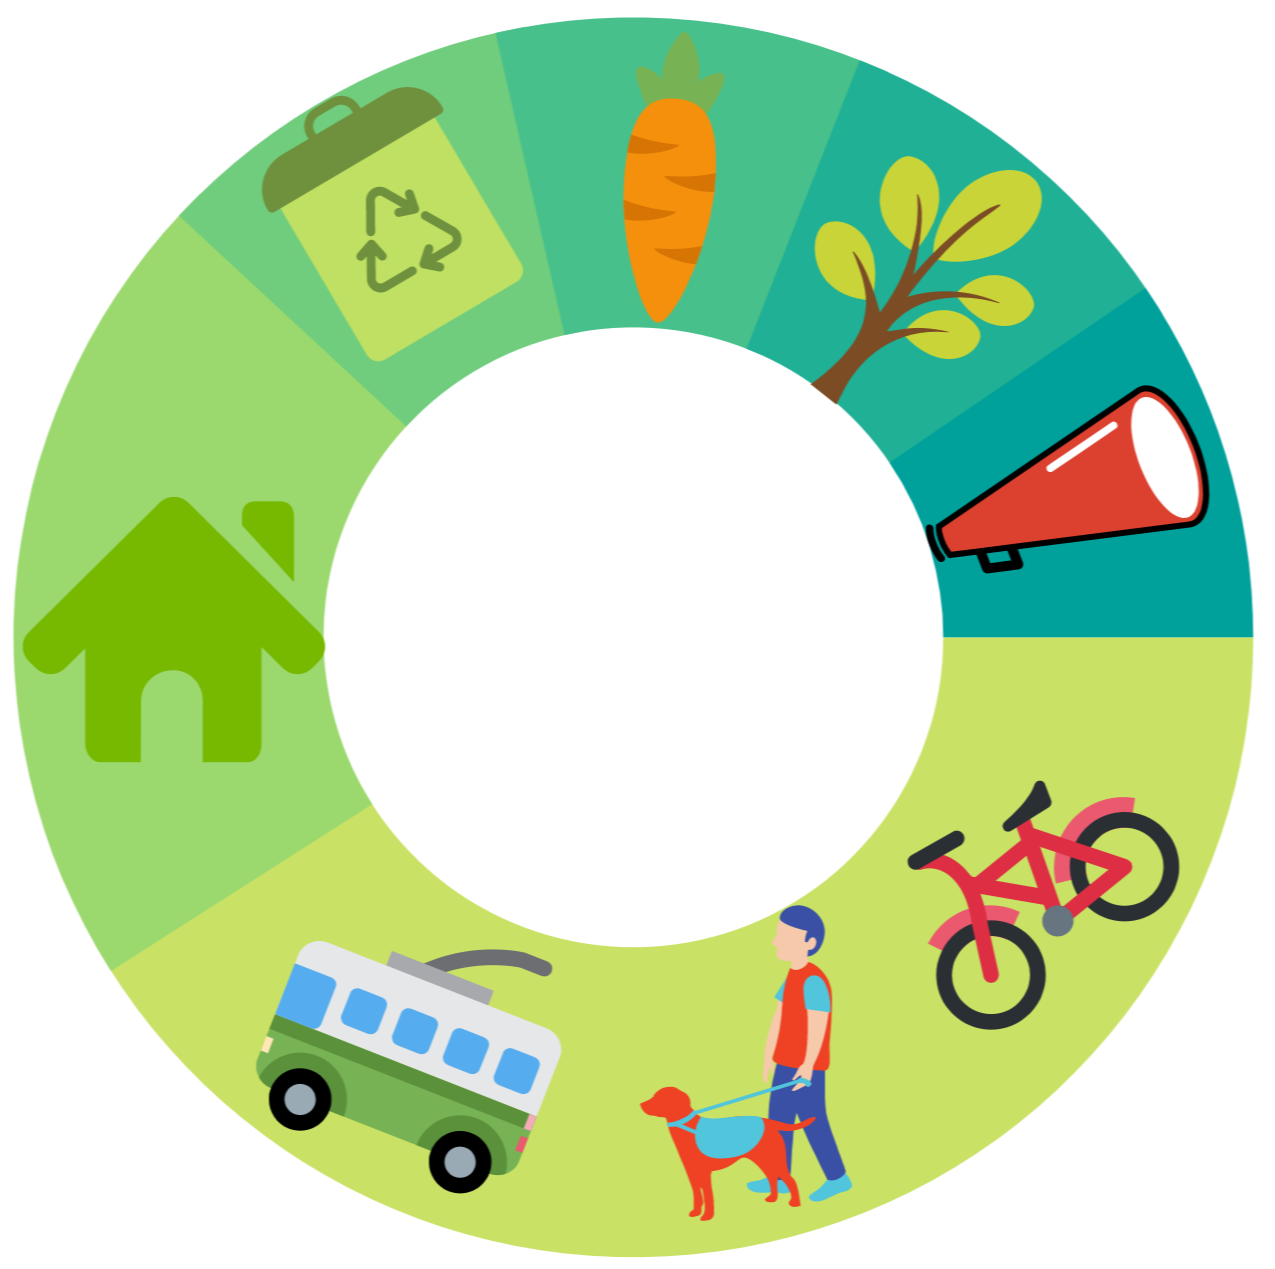 A circular design with icons relevant to climate change: a speaker phone, tree, carrot,  recycling bin, home, bus, human walking a dog, and bicycle. 